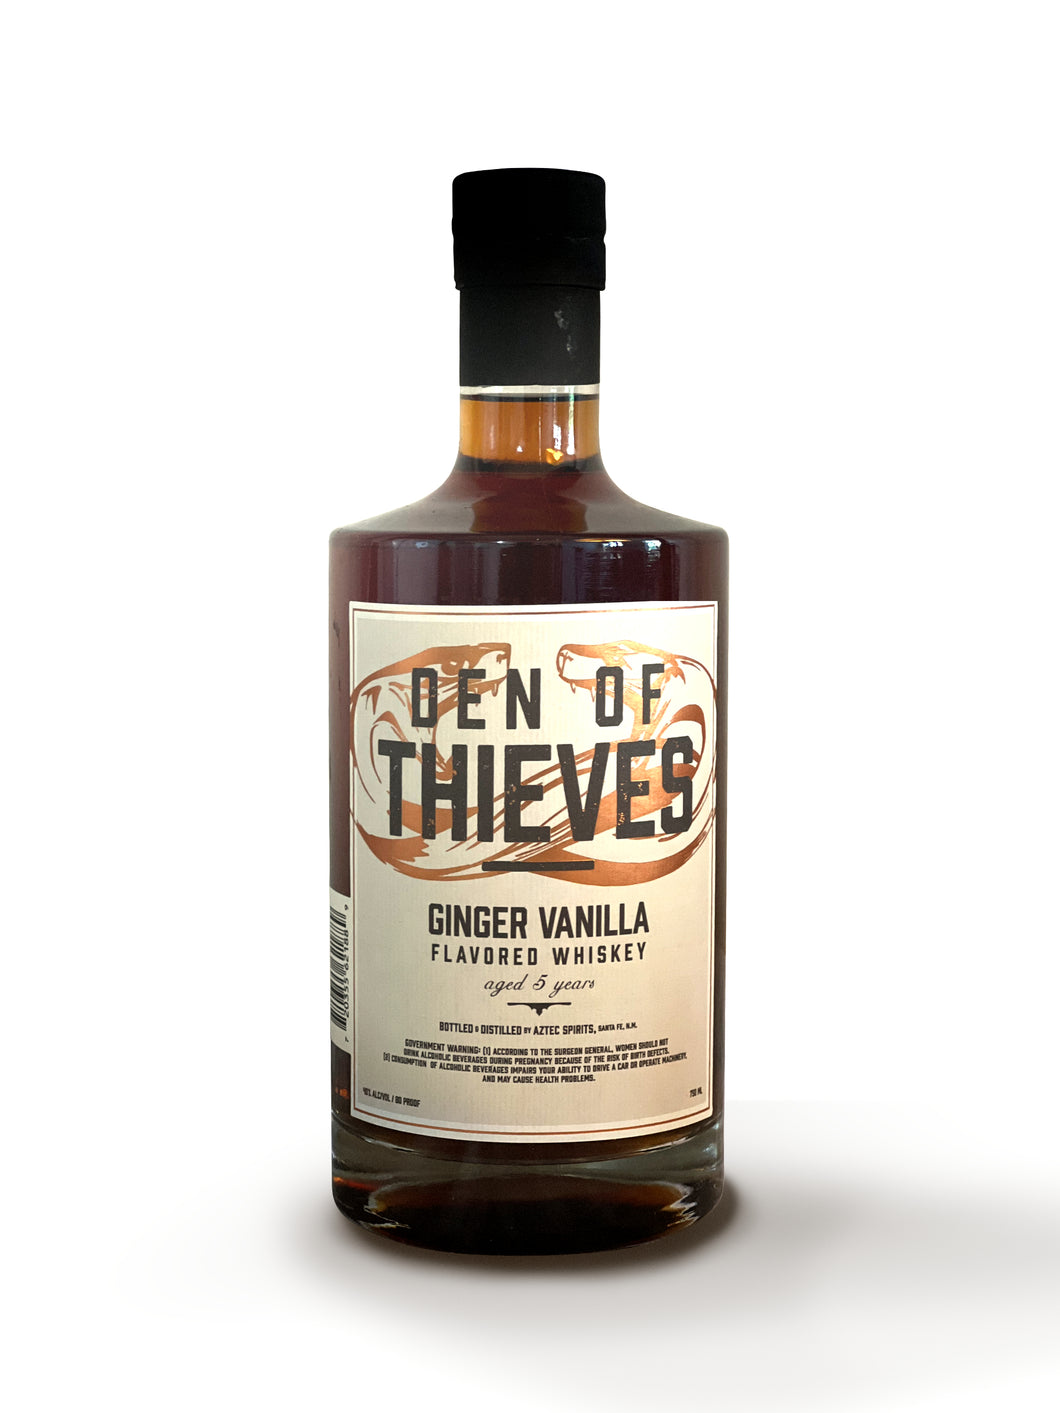 Den of Thieves Ginger Vanilla Flavored Whiskey